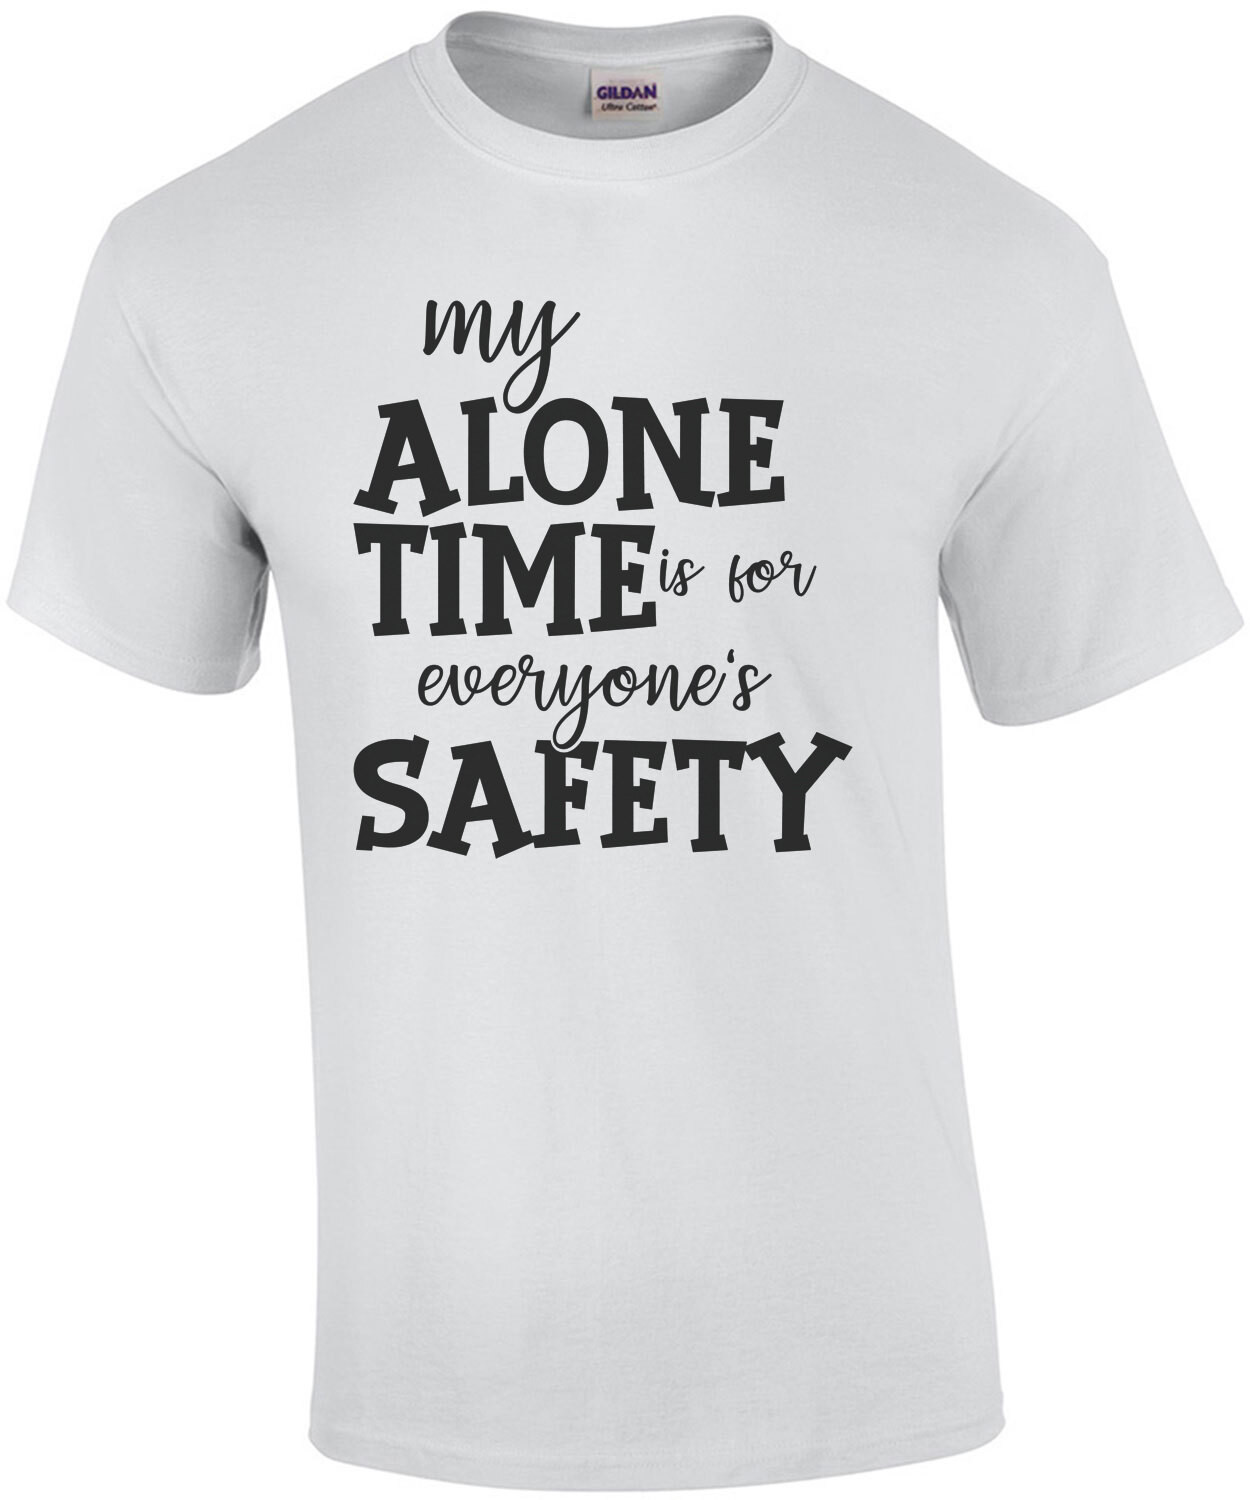 My alone time is for everyone's safety - funny t-shirt